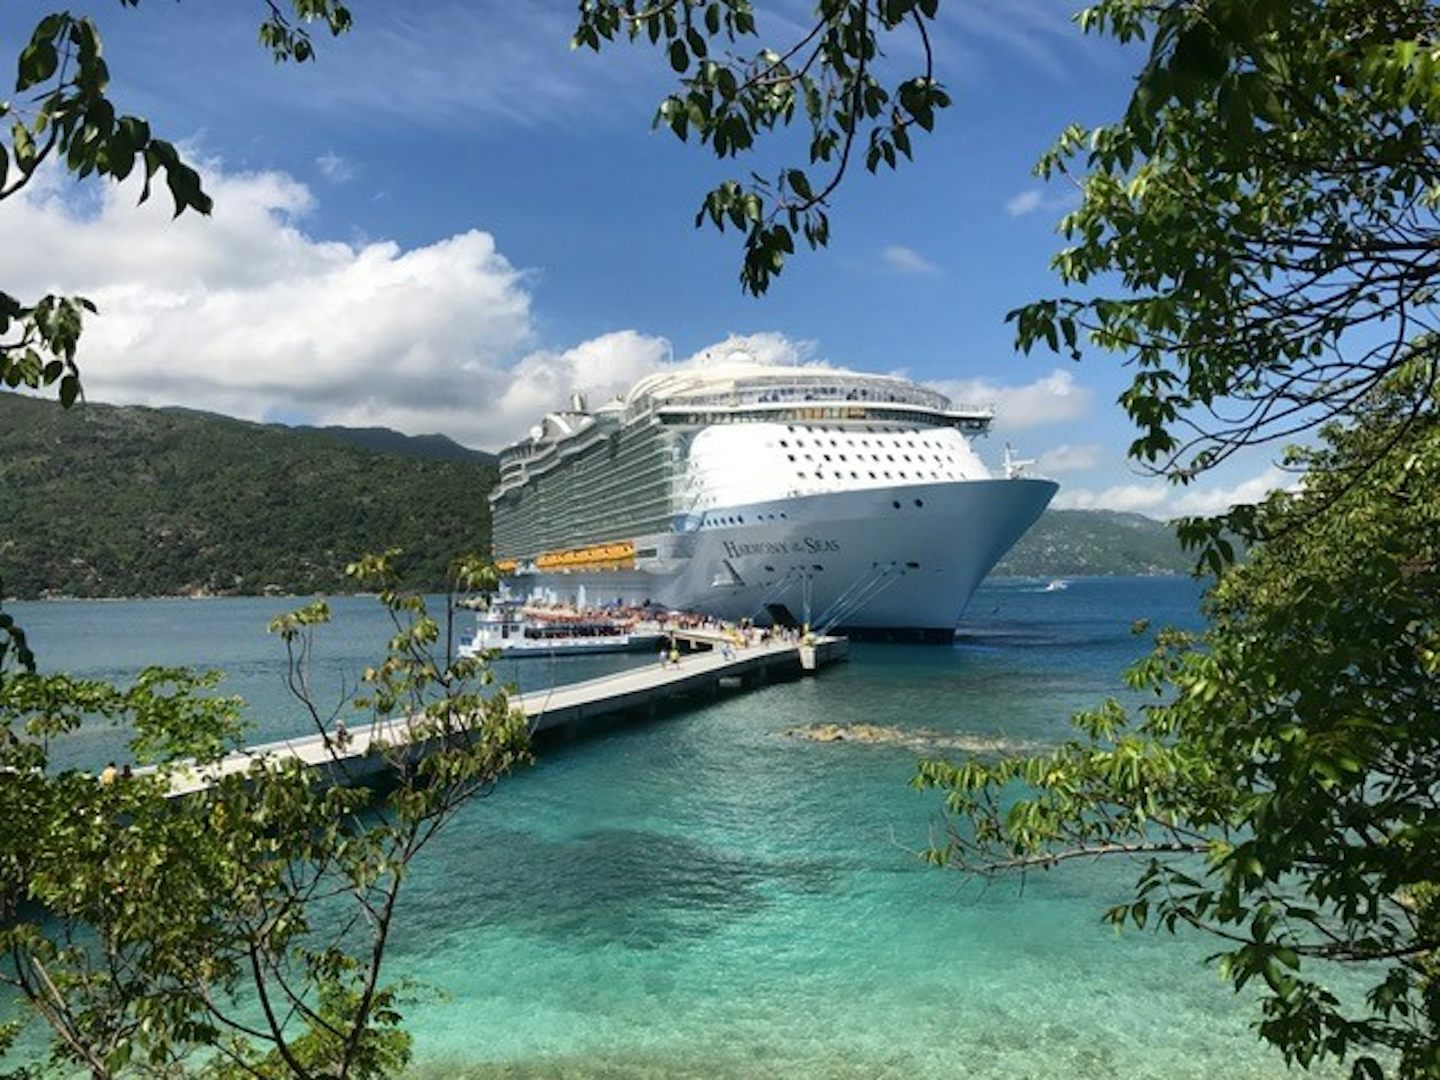 My "kodak moment" pic-snapping of Harmony while docked in Labadee,